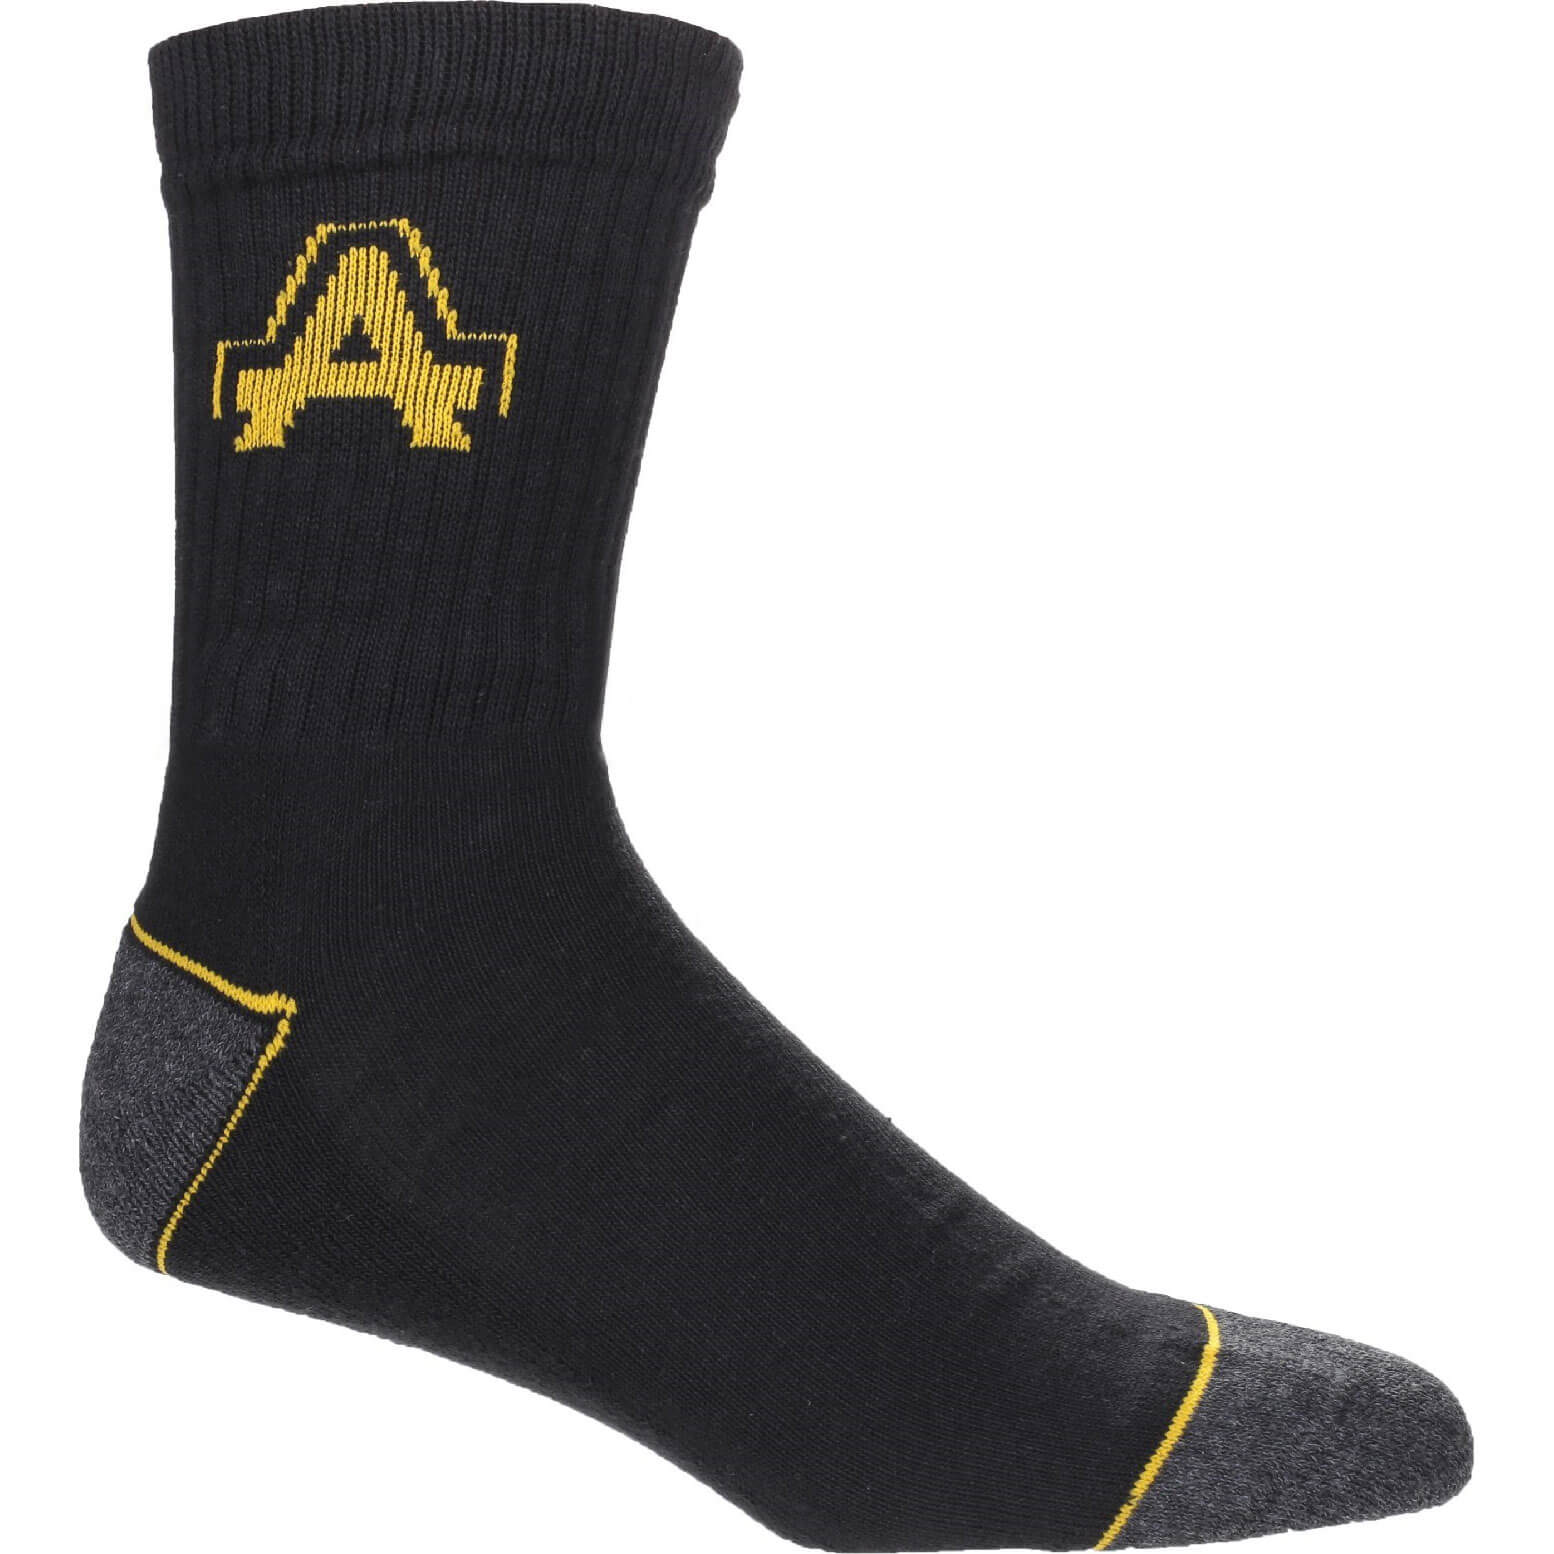 Image of Amblers Safety Heavy Duty Work Socks 3 Pack 6 - 11